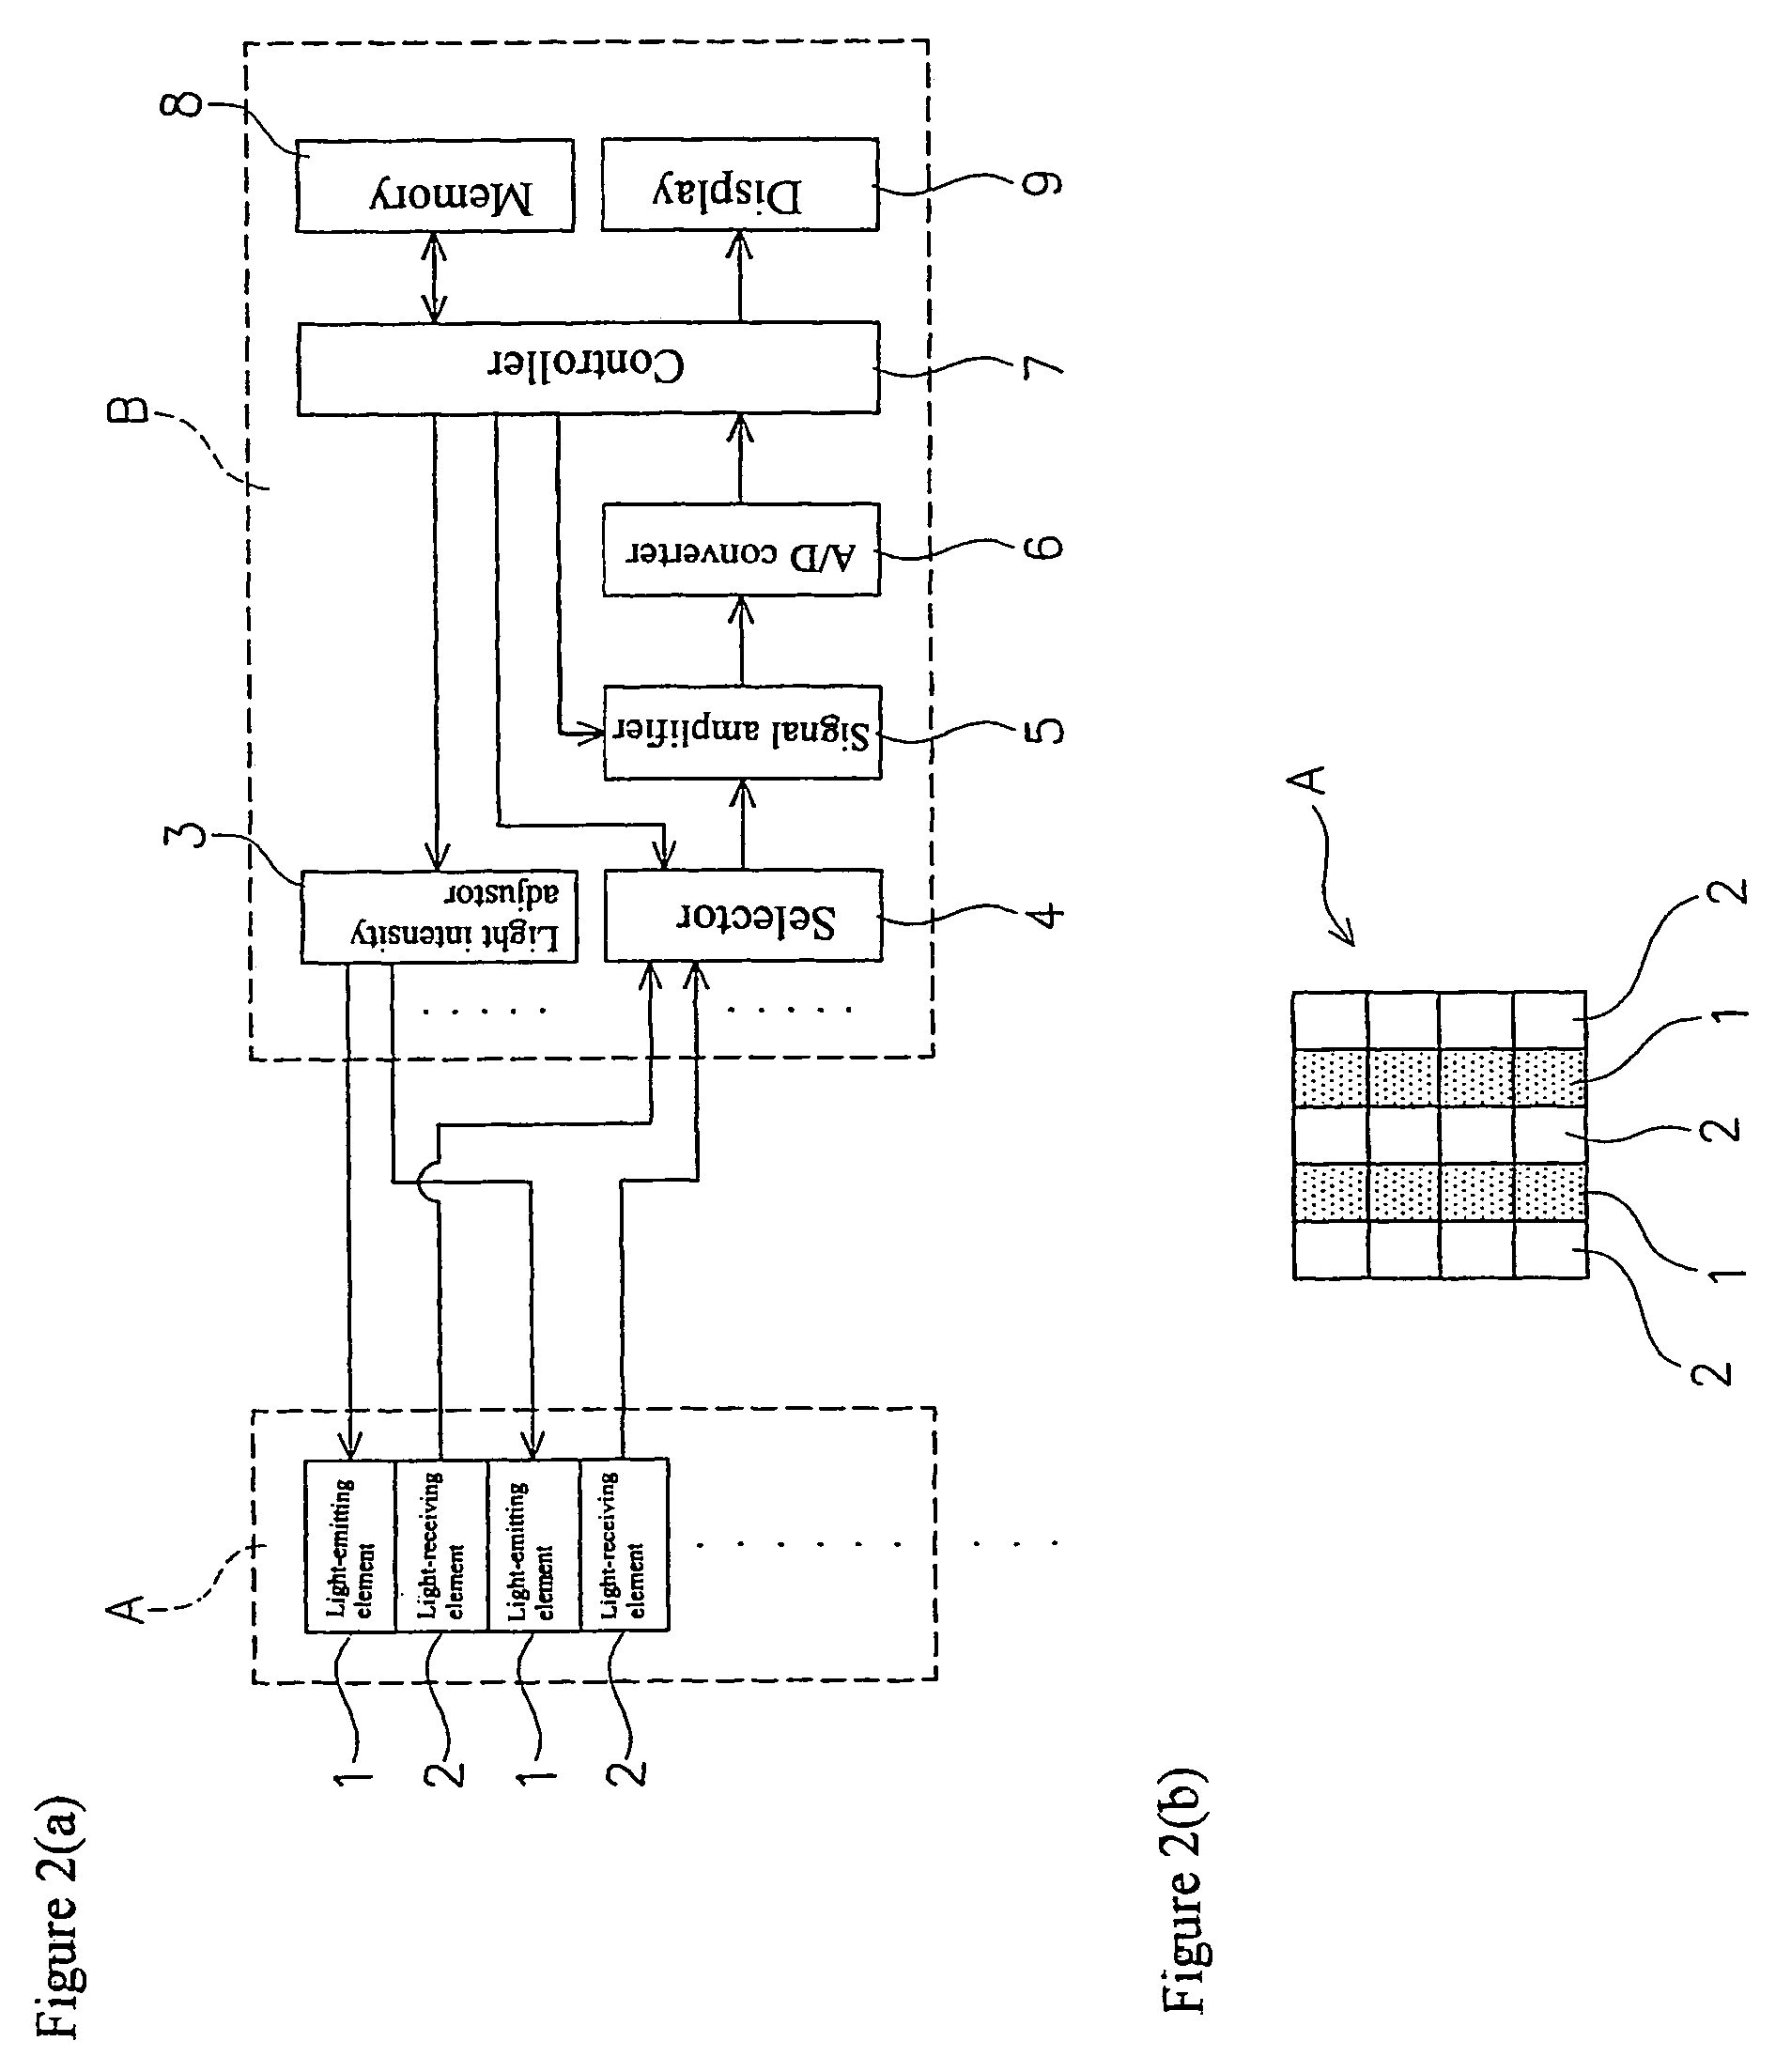 Apparatus for evaluating biological function